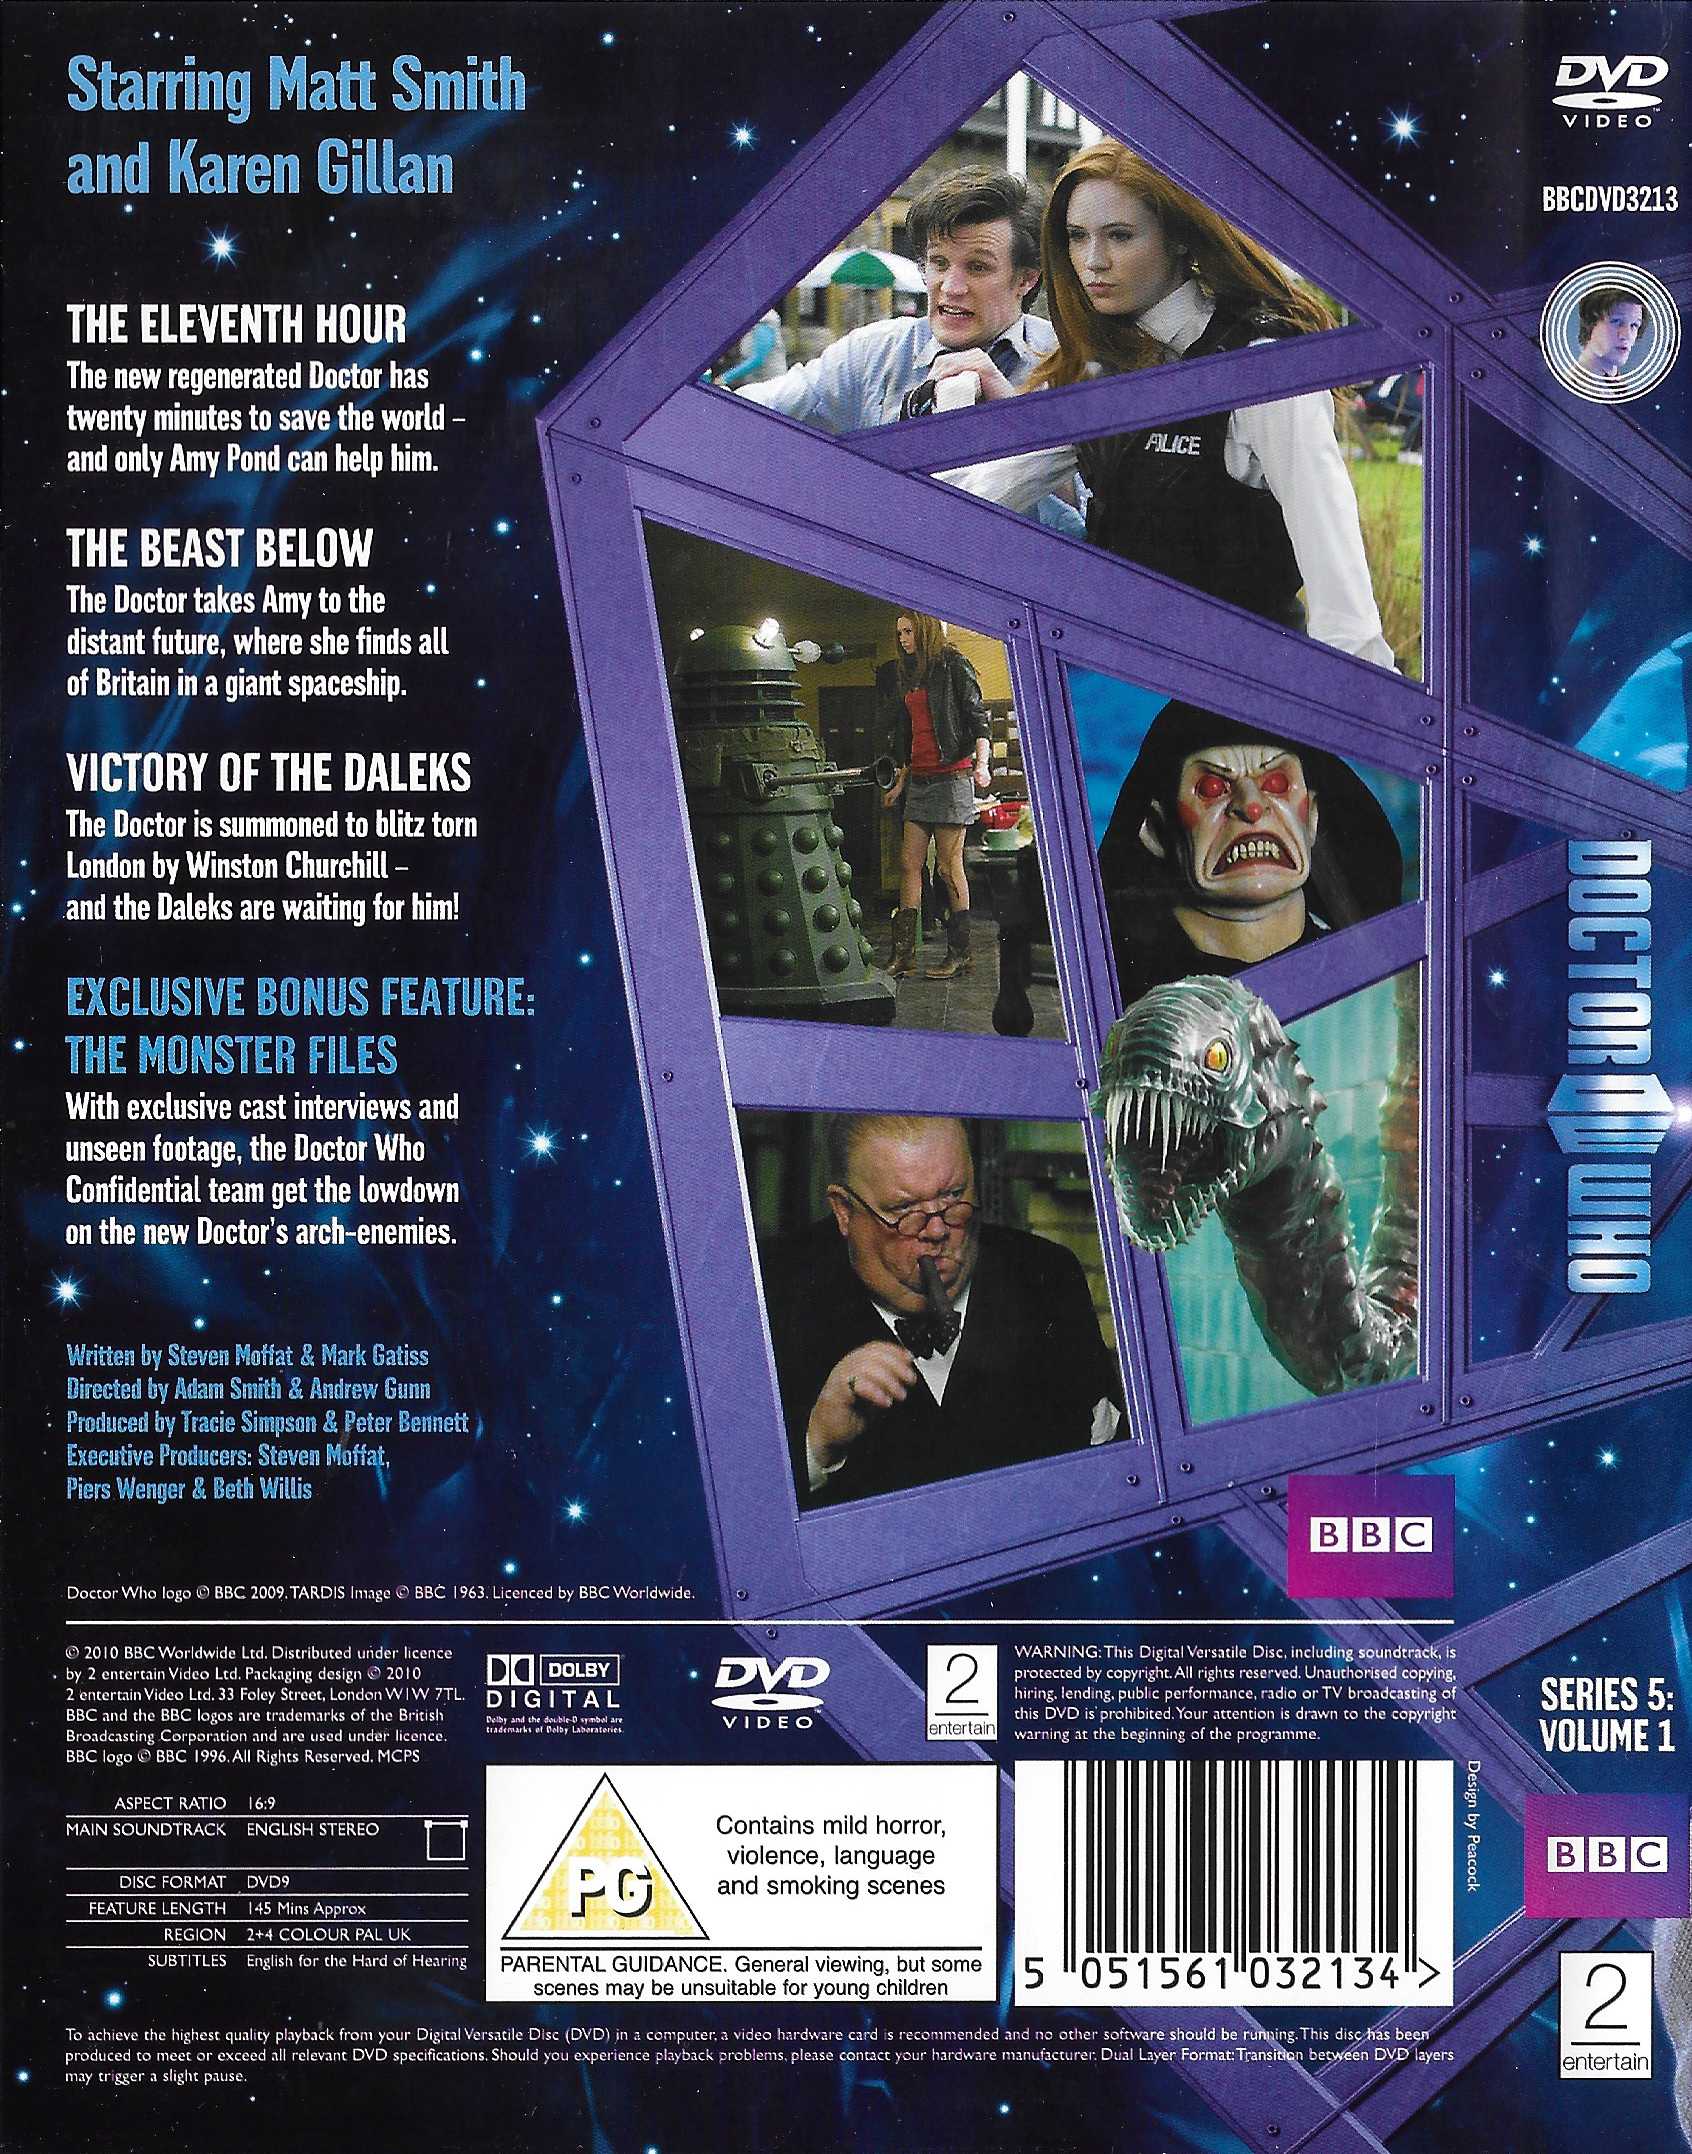 Picture of BBCDVD 3213 Doctor Who - Series 5, volume 1 by artist Steven Moffat / Mark Gatiss from the BBC records and Tapes library